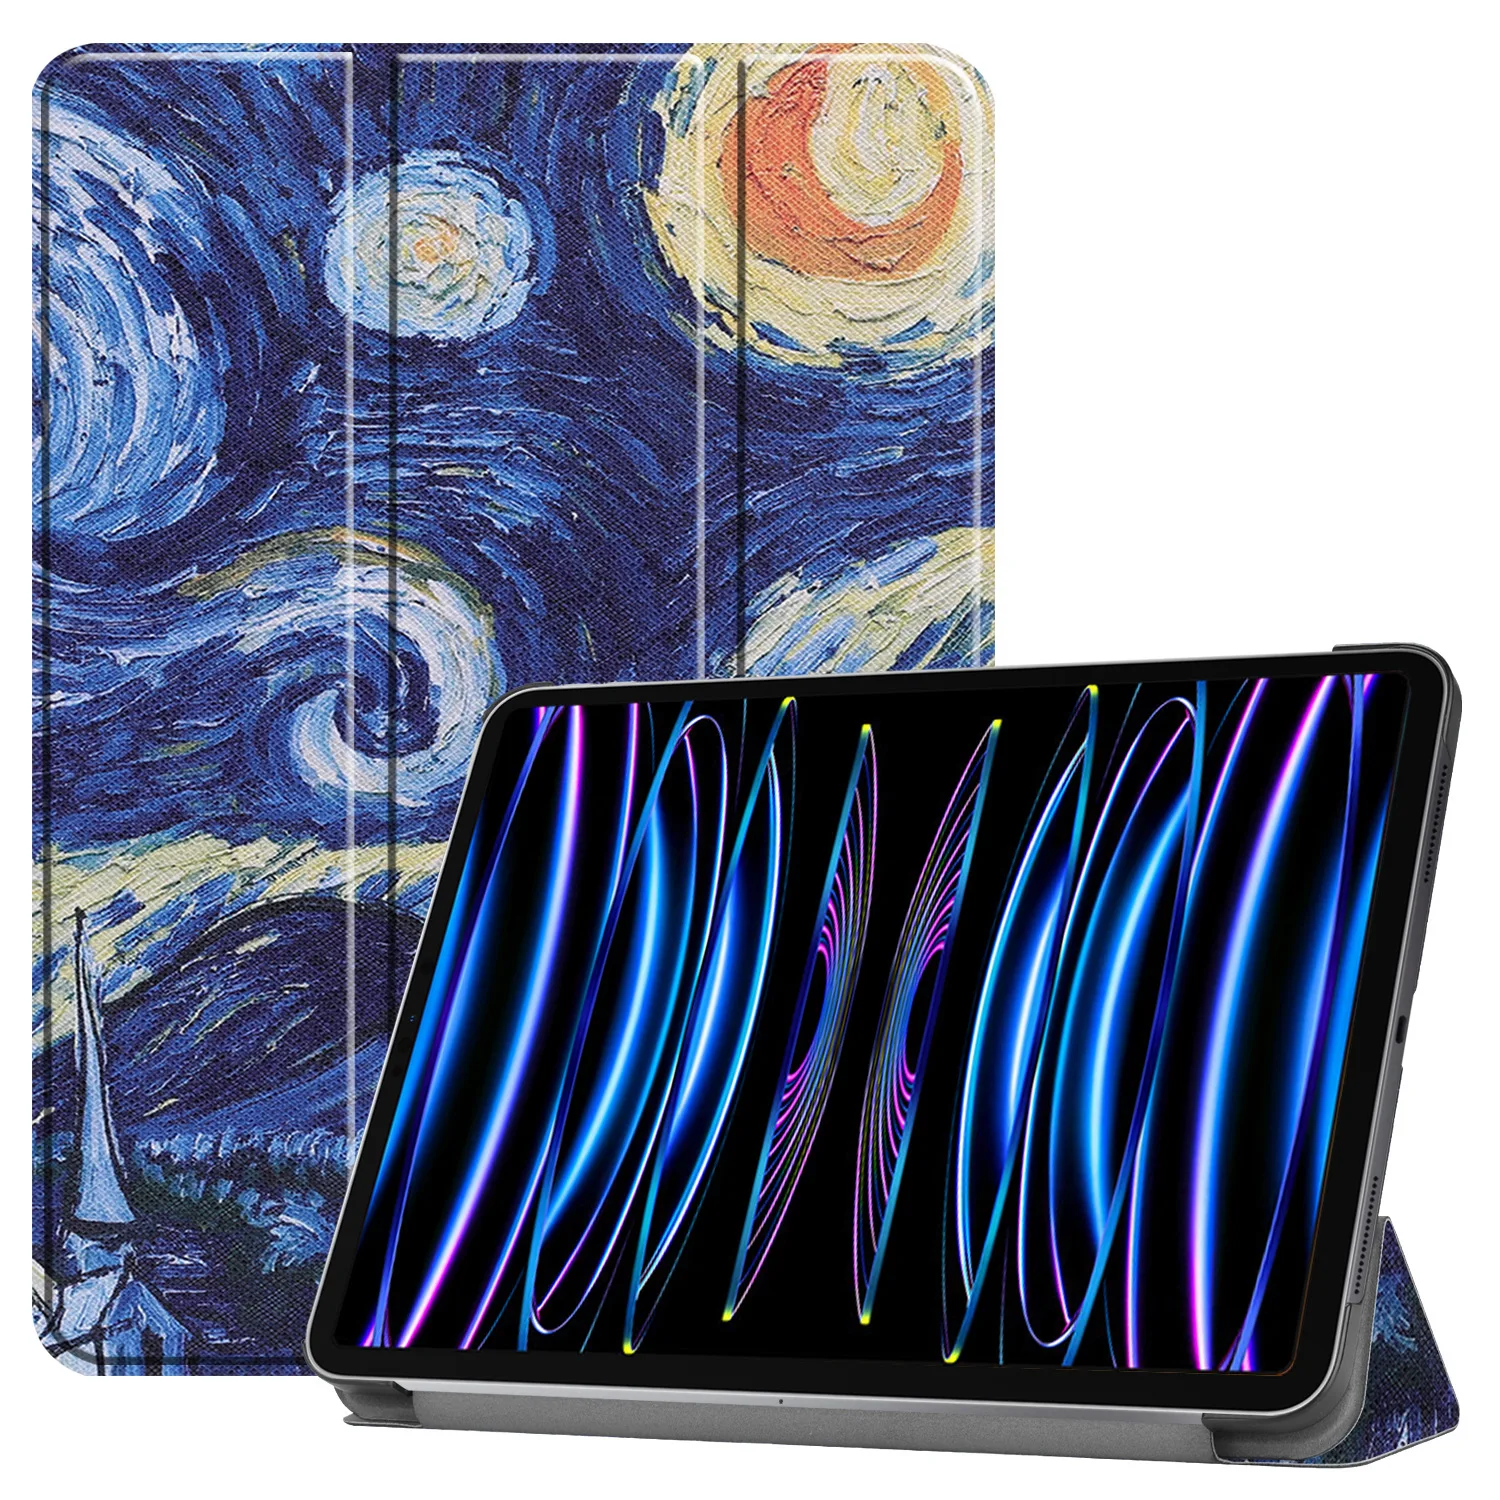 

Magnetic Ipad Case For Ipad Mini6 5 4 Air3 4 5 Ipad7 8 9 10th 10.9 For Pro 11 1 2 3 4th Pro 10.5 2017 Three Fold Painted Cover